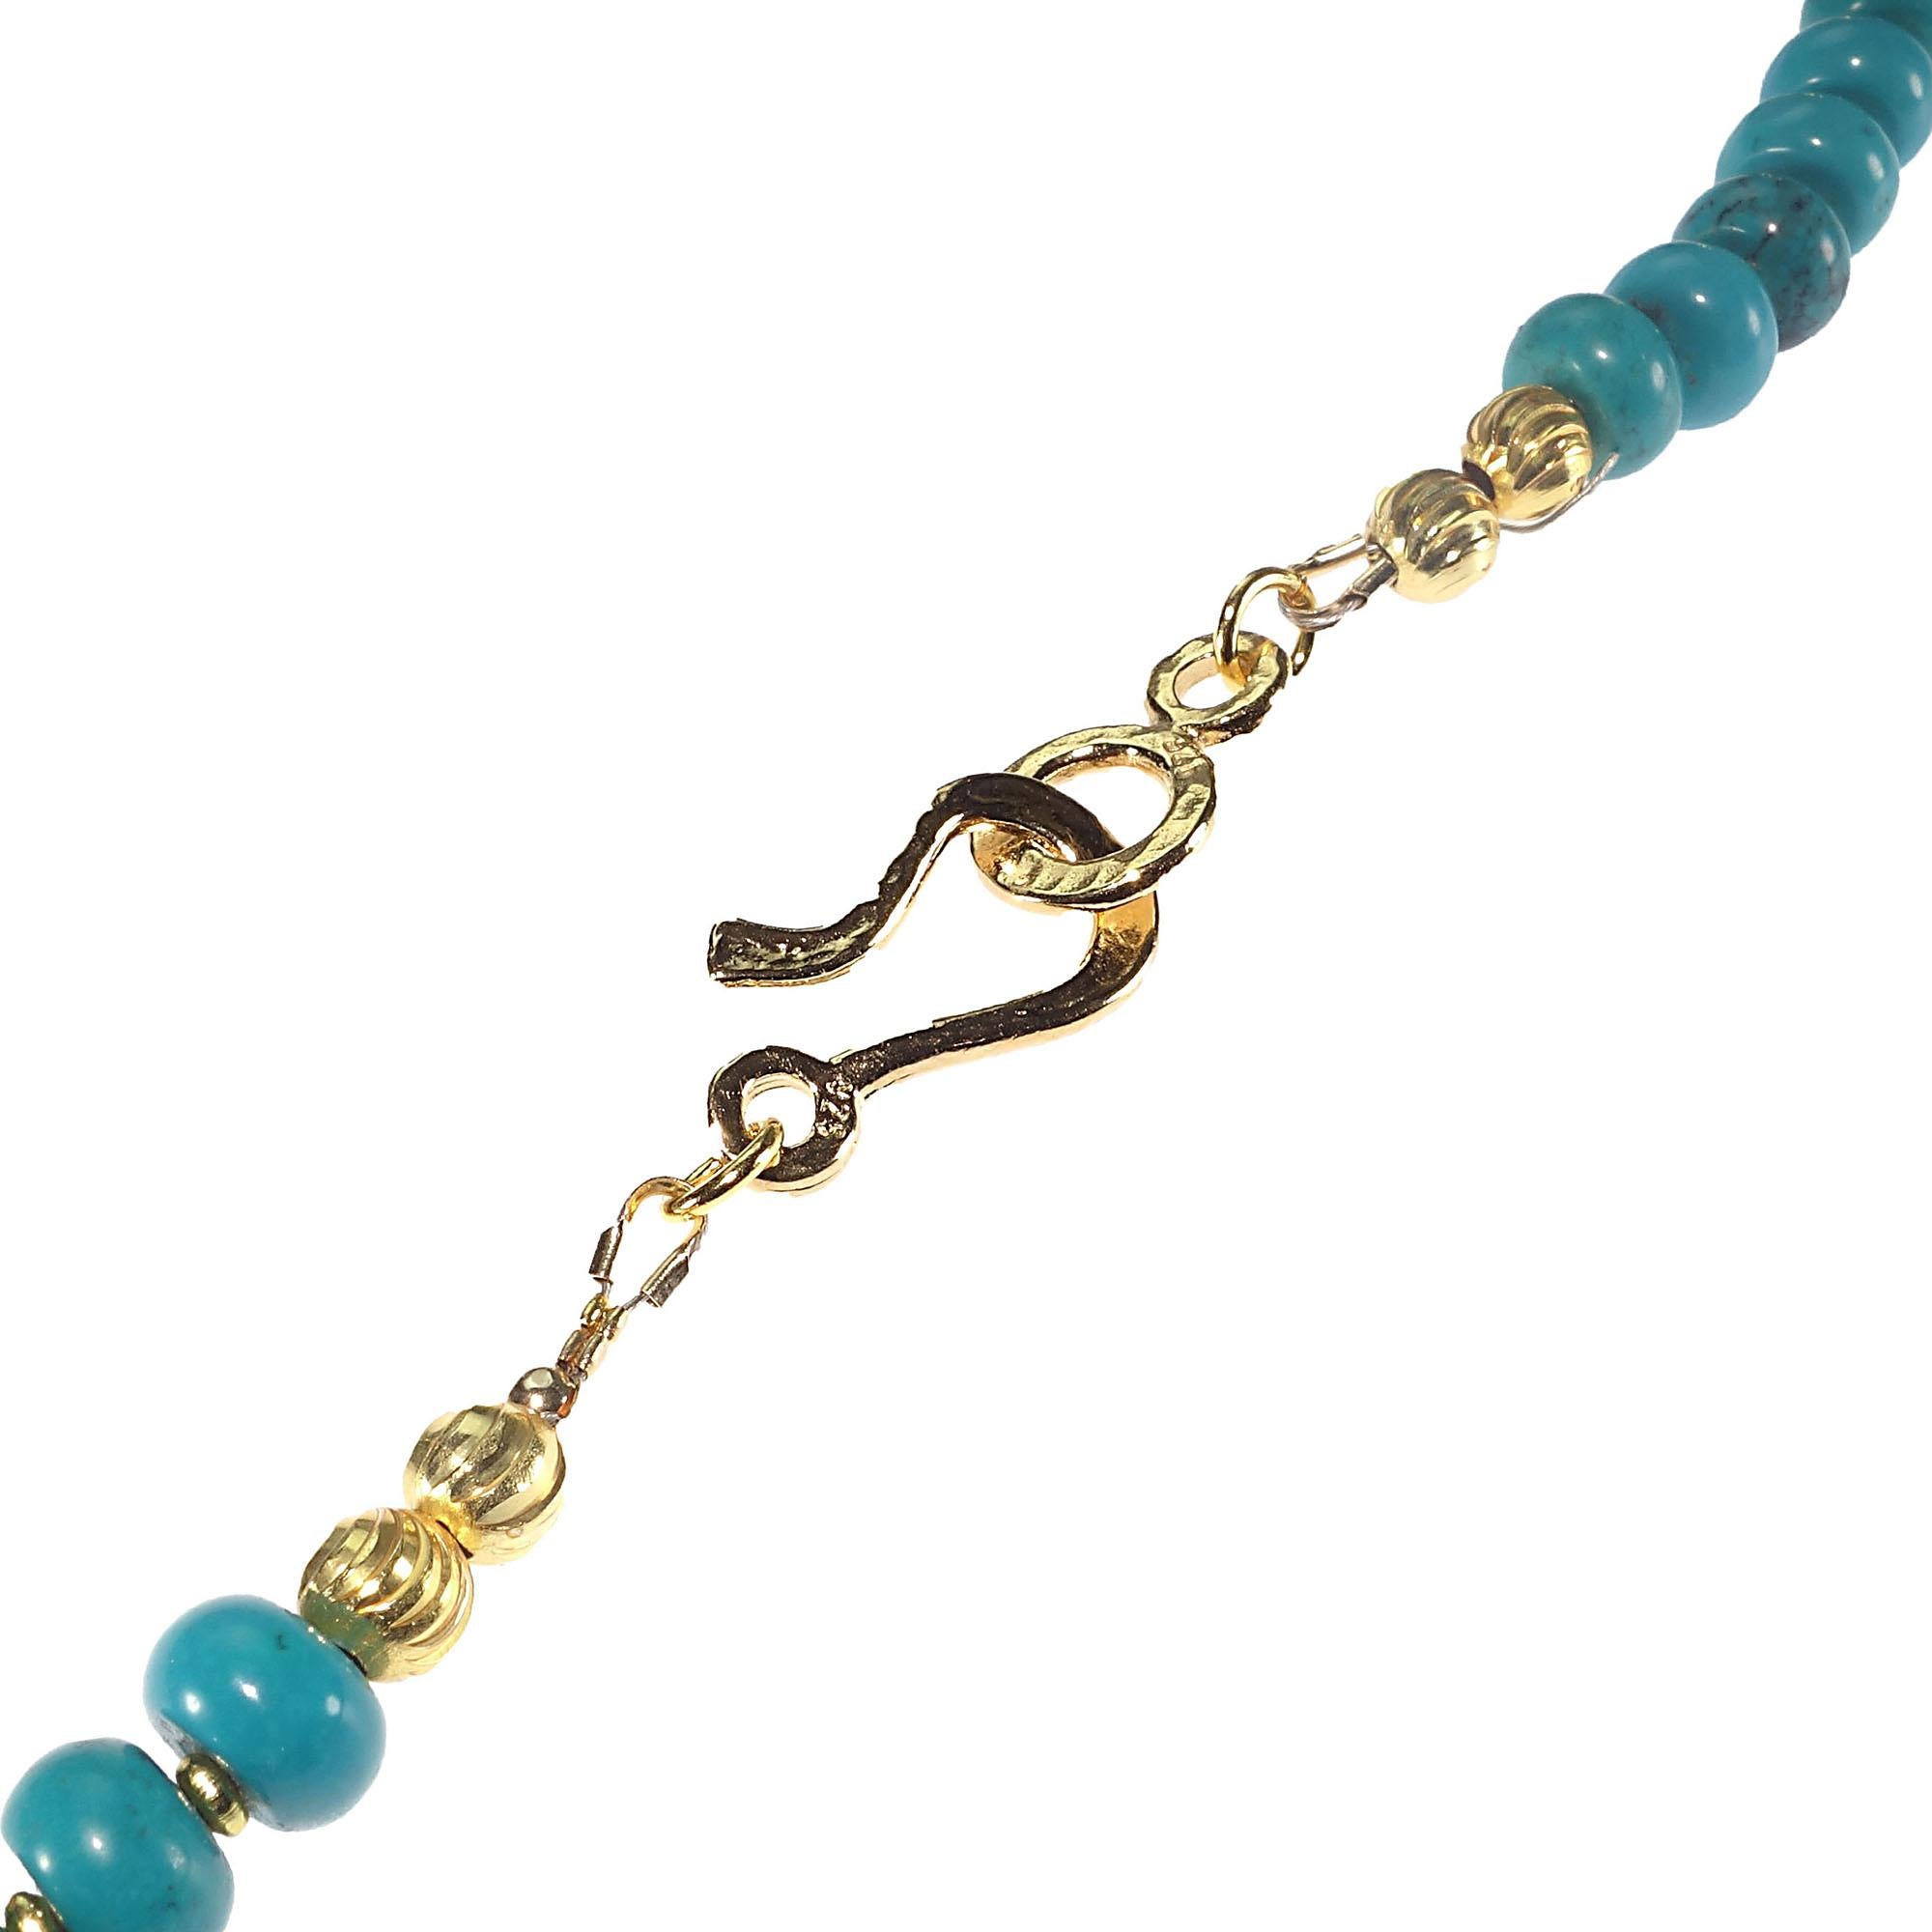 Artisan AJD Stunning Hubei Turquoise Necklace with Gold Accents